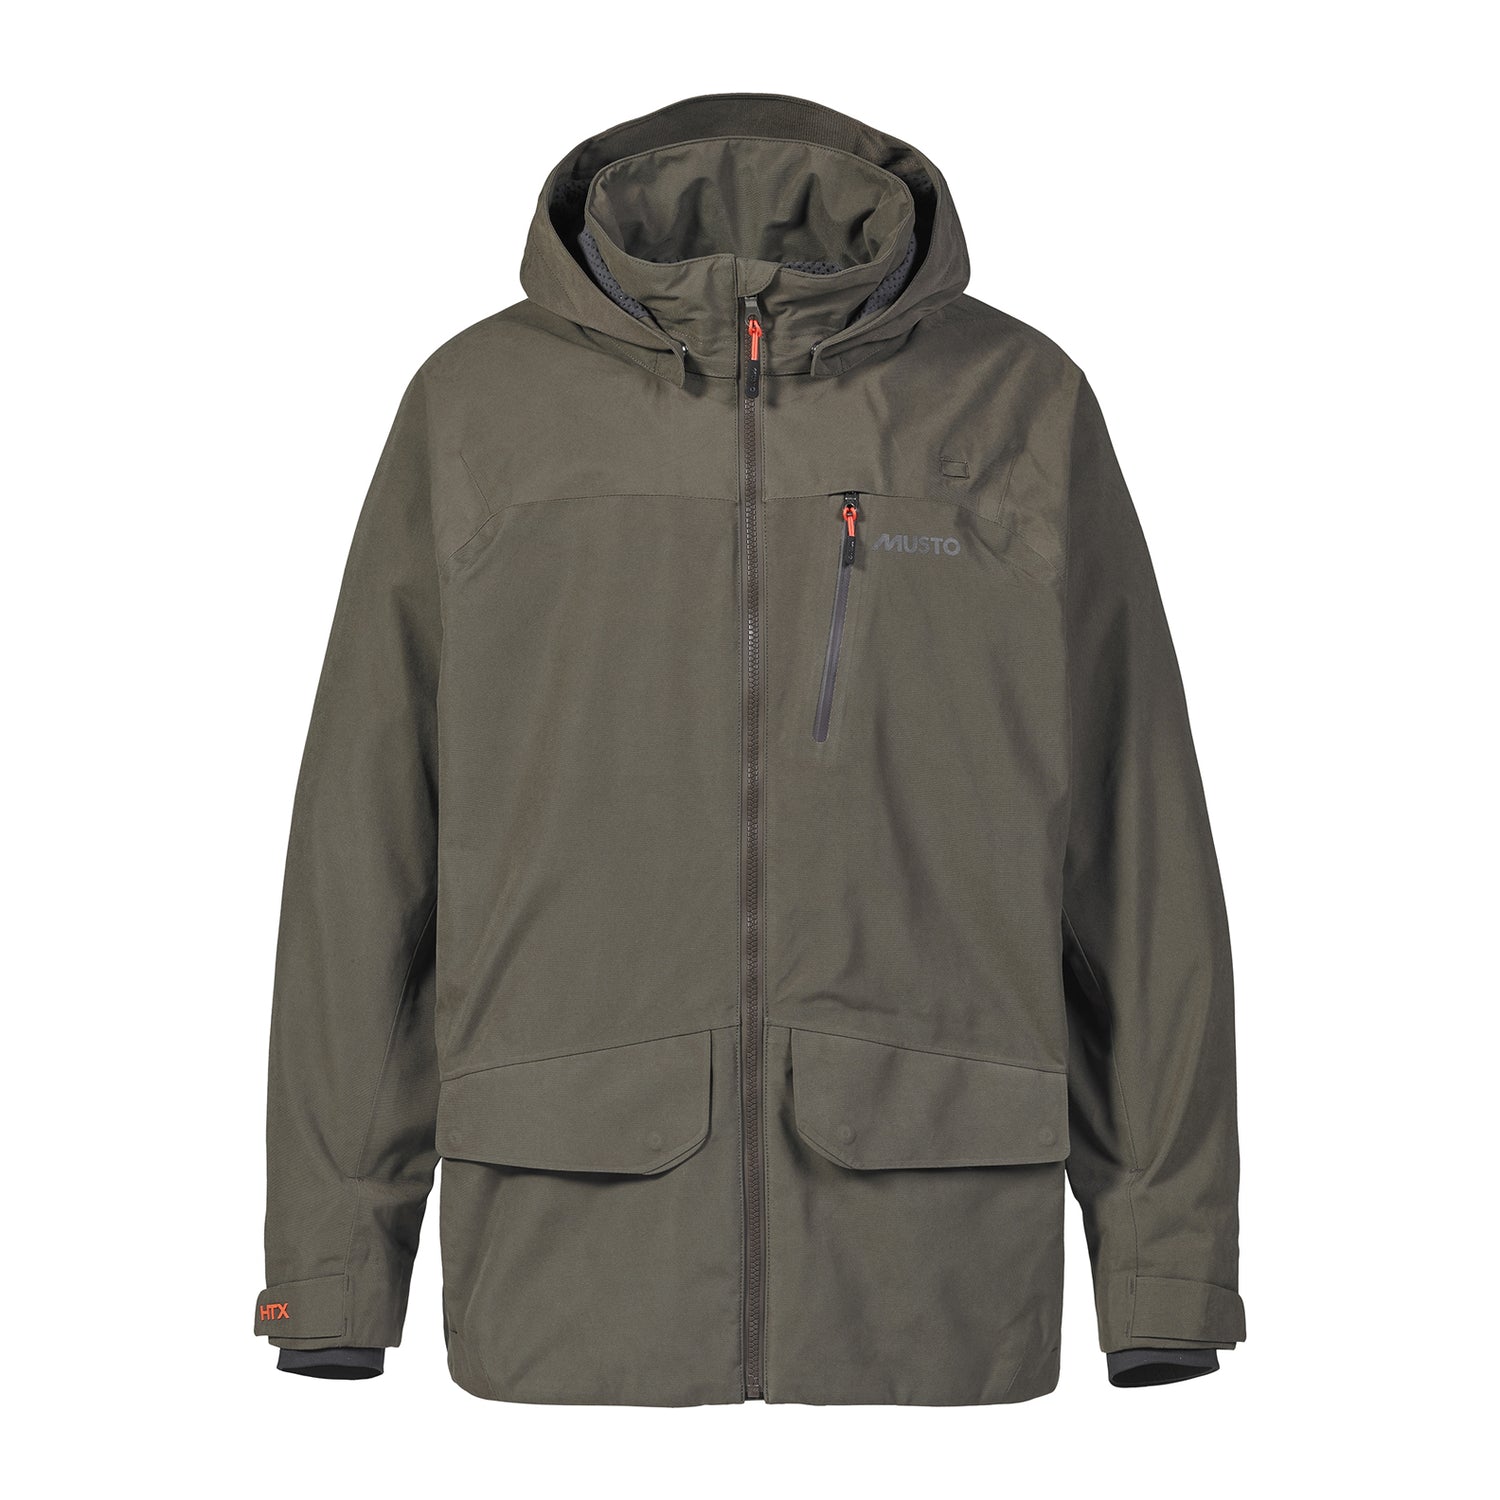 Musto-HTX-Keepers-Jacket